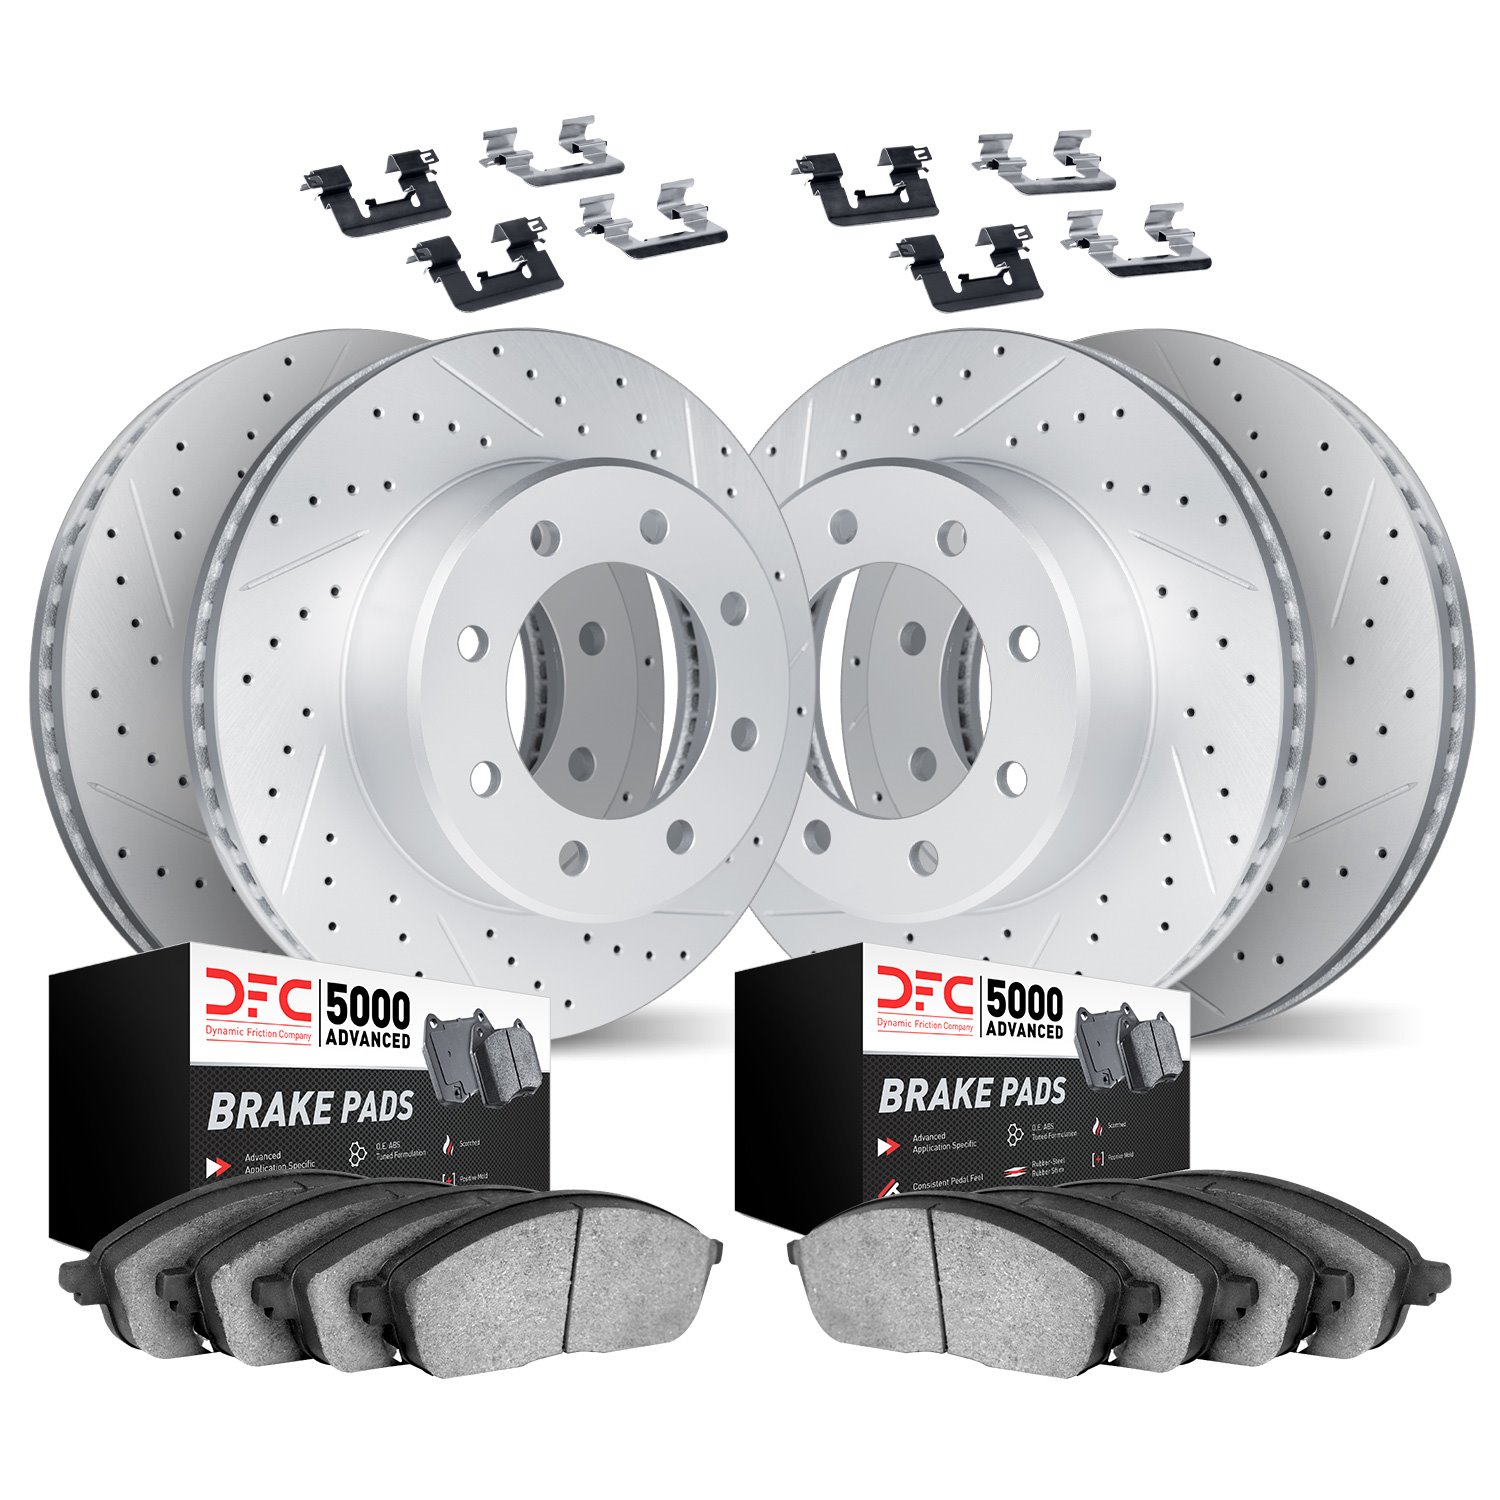 2514-48014 Geoperformance Drilled/Slotted Rotors w/5000 Advanced Brake Pads Kit & Hardware, 2003-2017 GM, Position: Front and Re